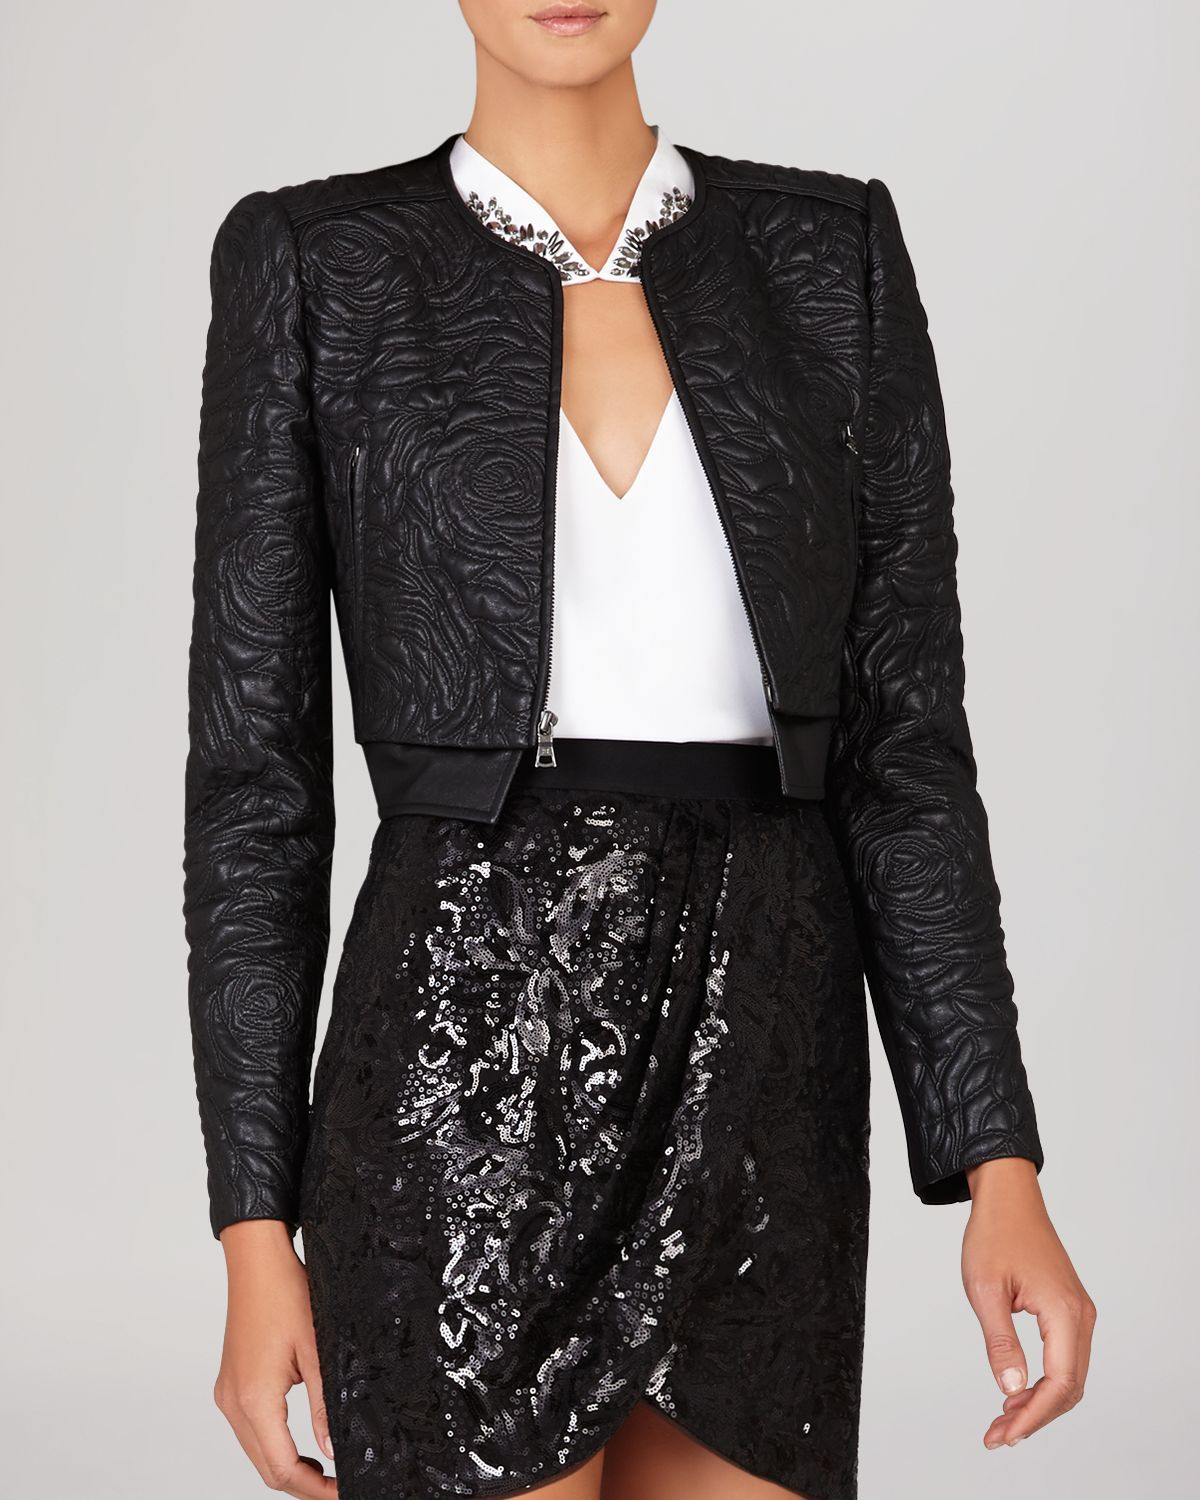 Lyst - Bcbgmaxazria Jacket - Duke Embroidered Faux Leather in Black